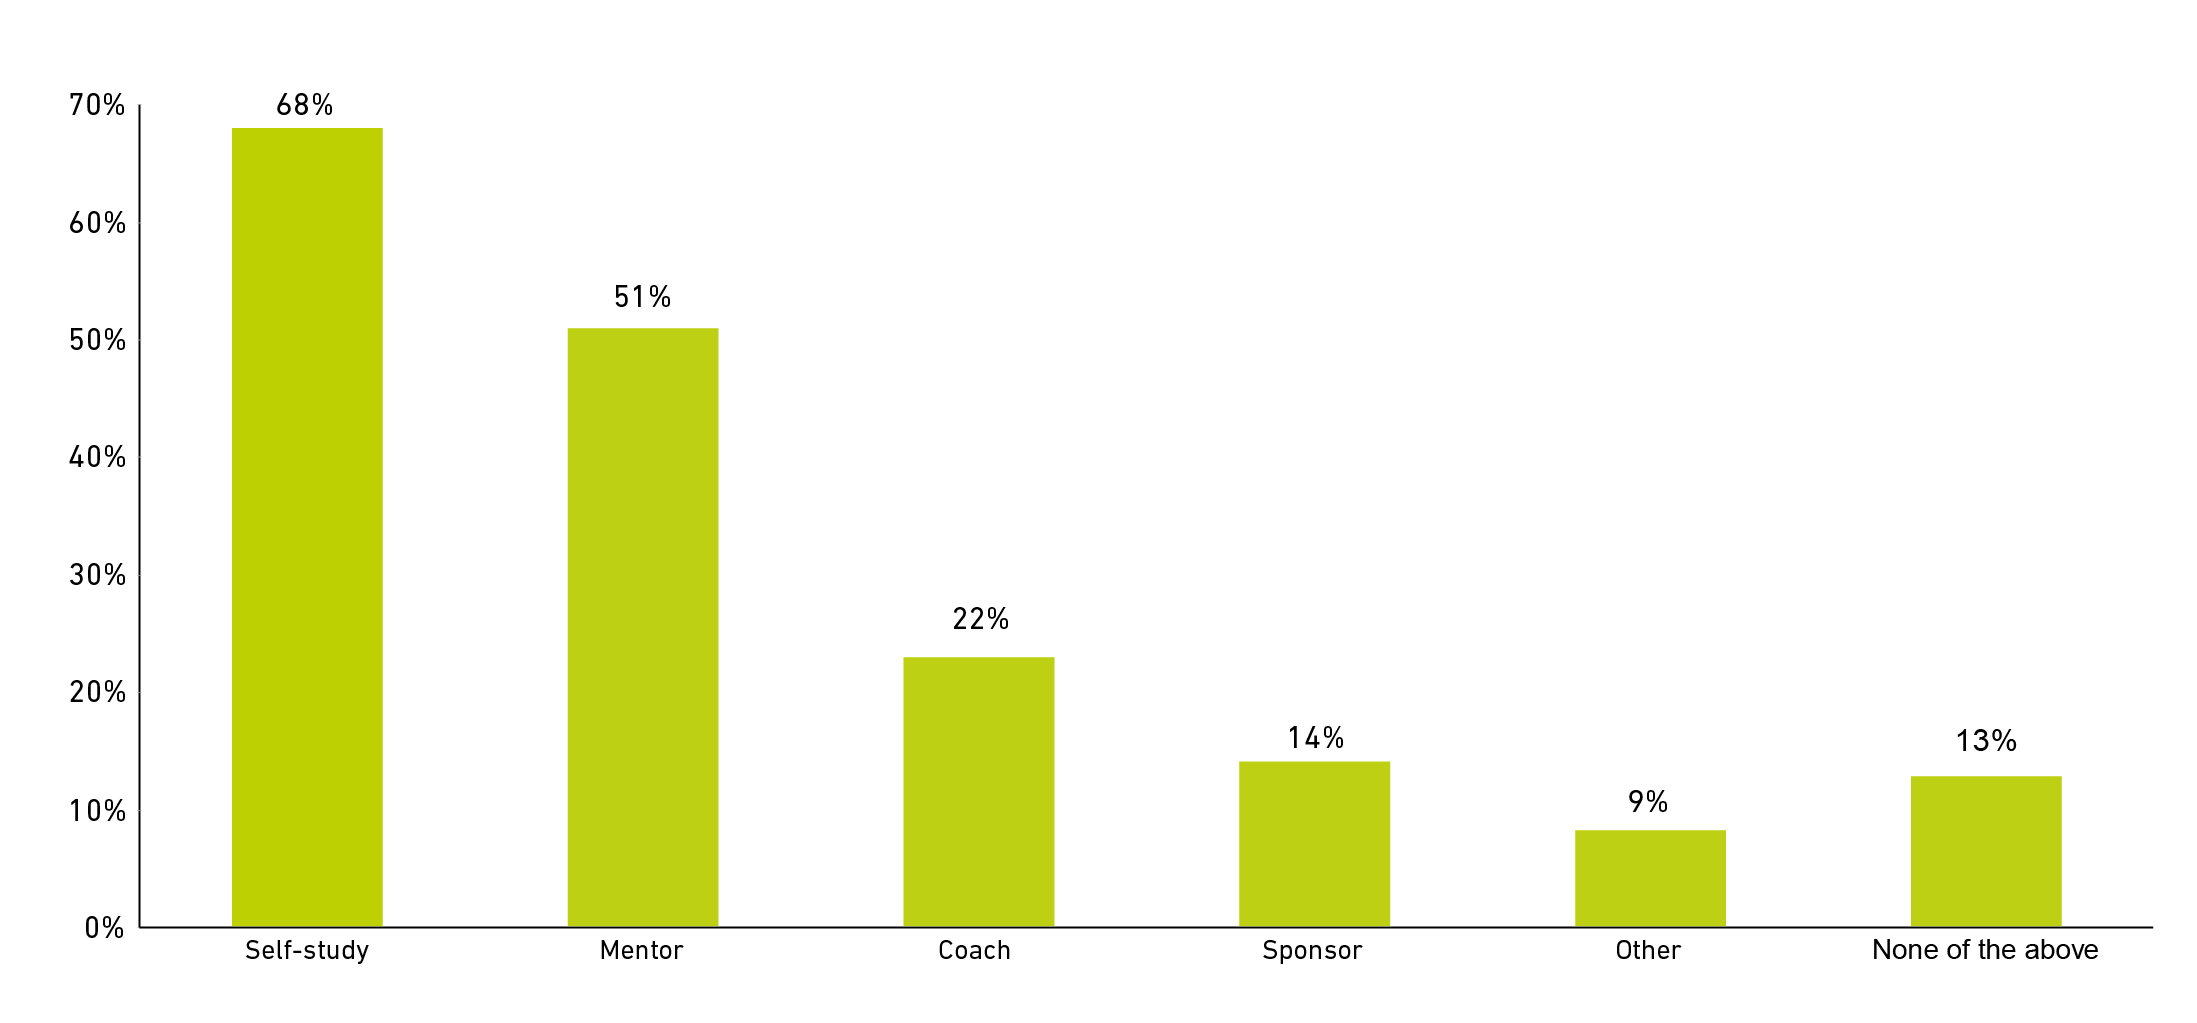 Graph showing that self-study was the top form of support in people's careers (68%)